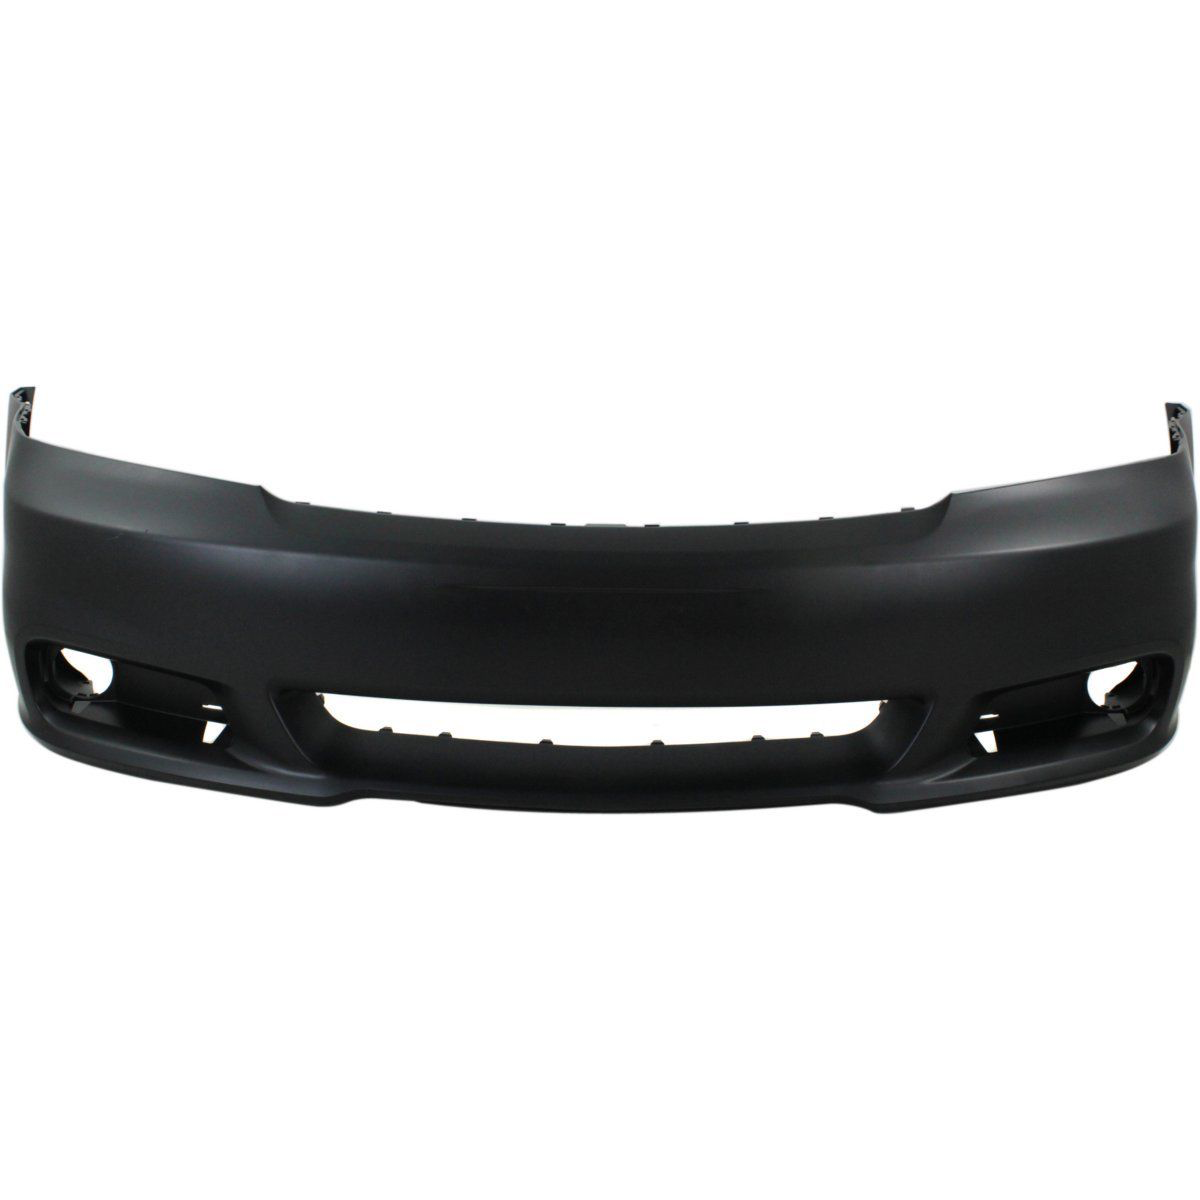 2011-2014 DODGE AVENGER Front Bumper Cover Painted to Match